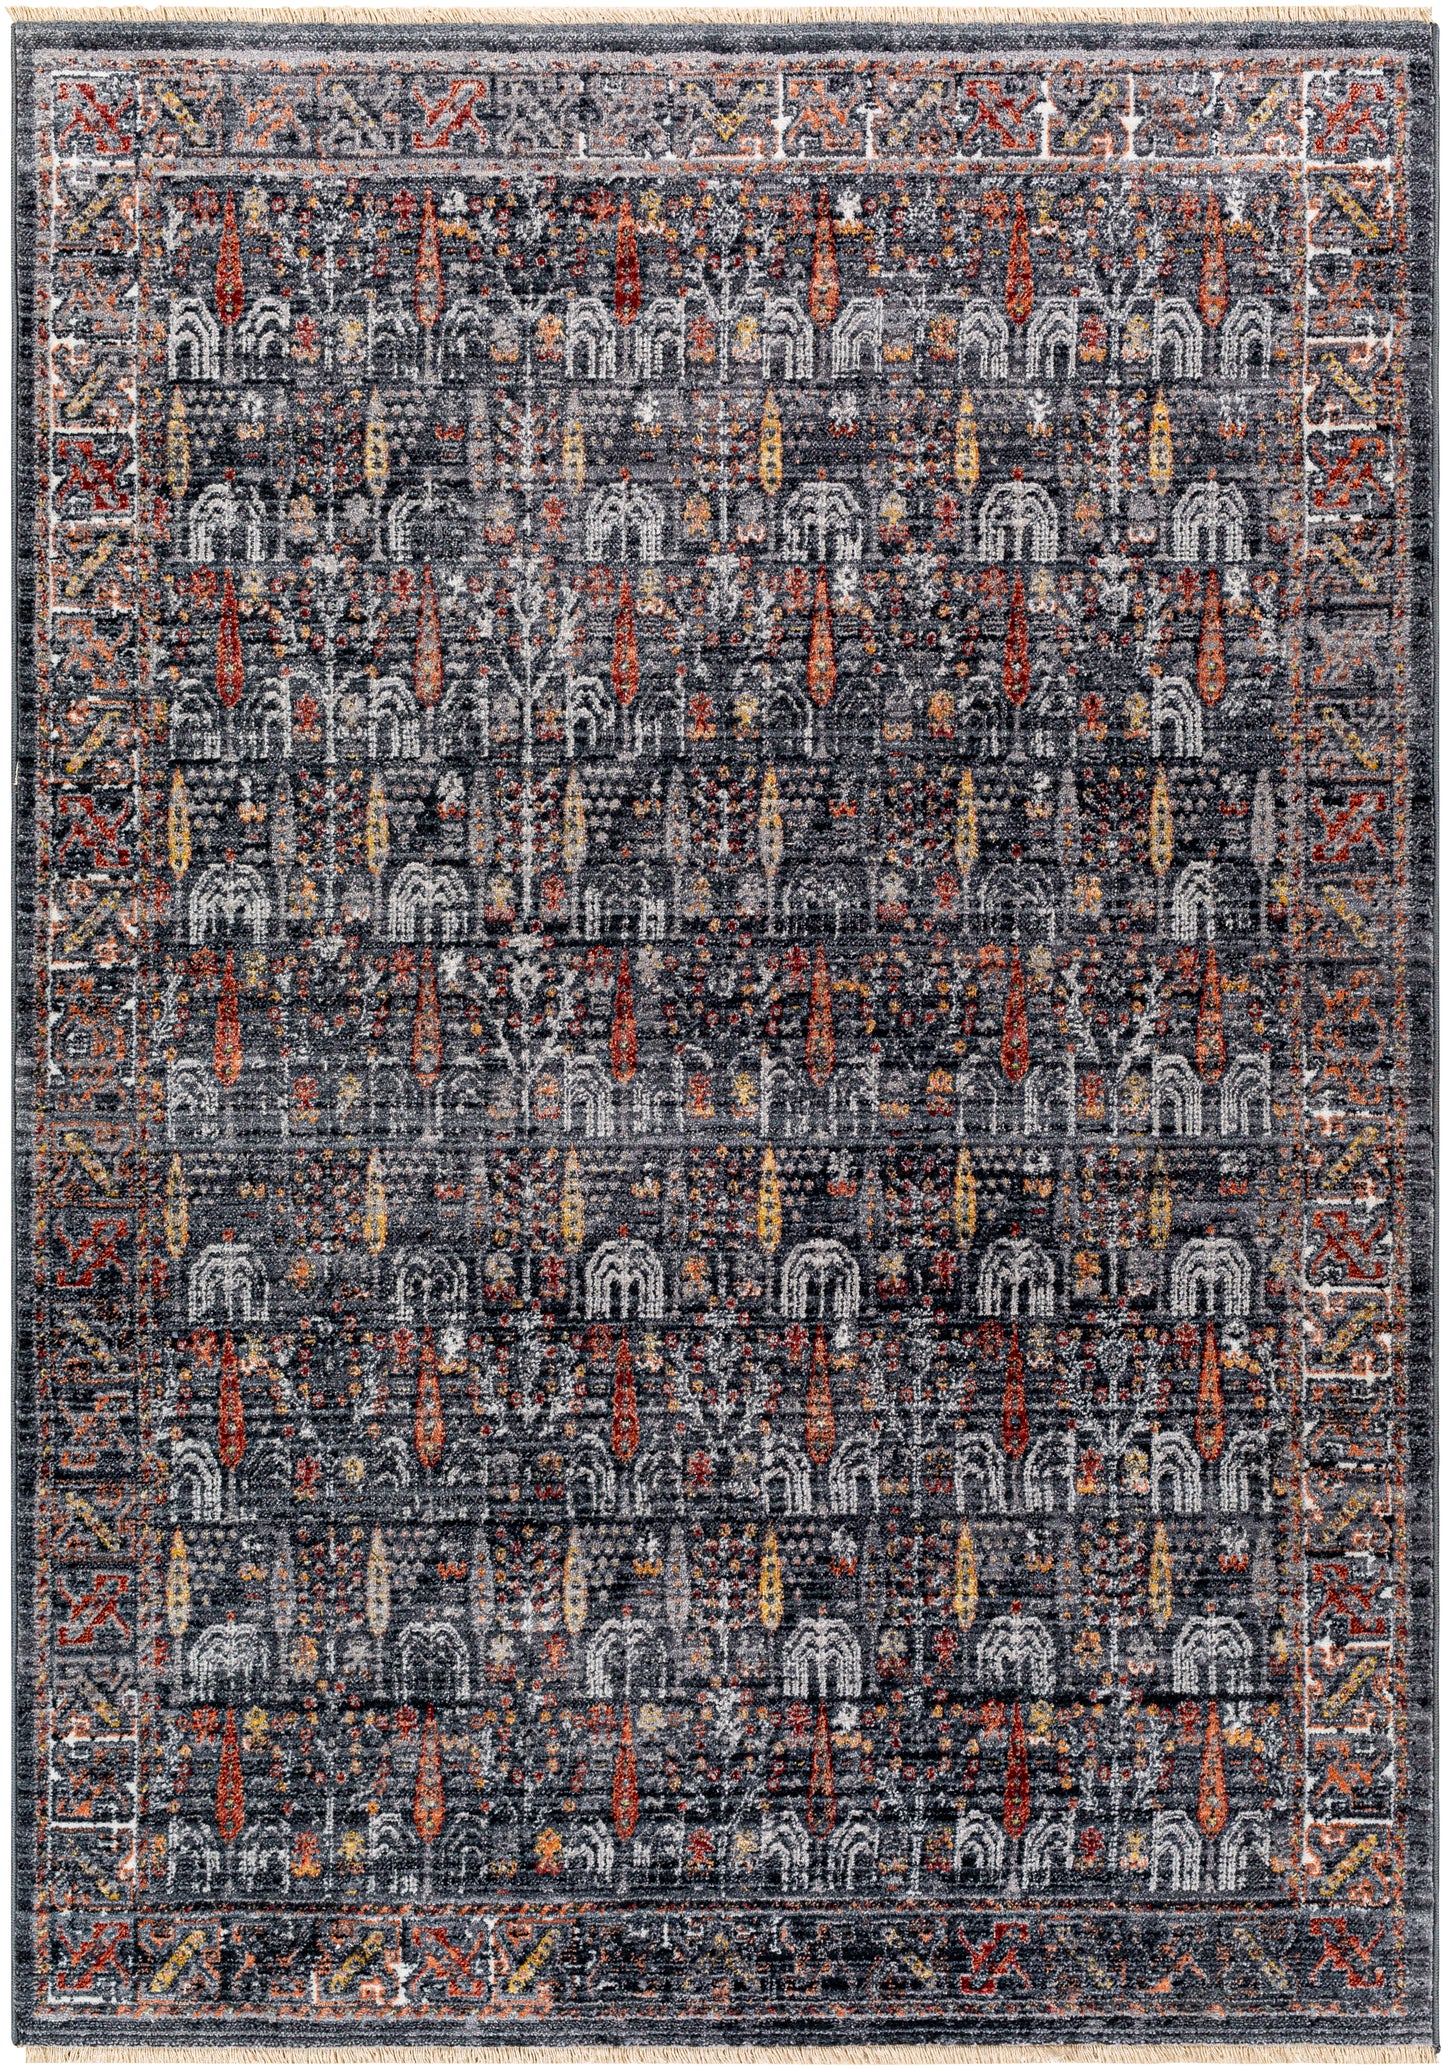 Babel 30796 Machine Woven Synthetic Blend Indoor Area Rug by Surya Rugs